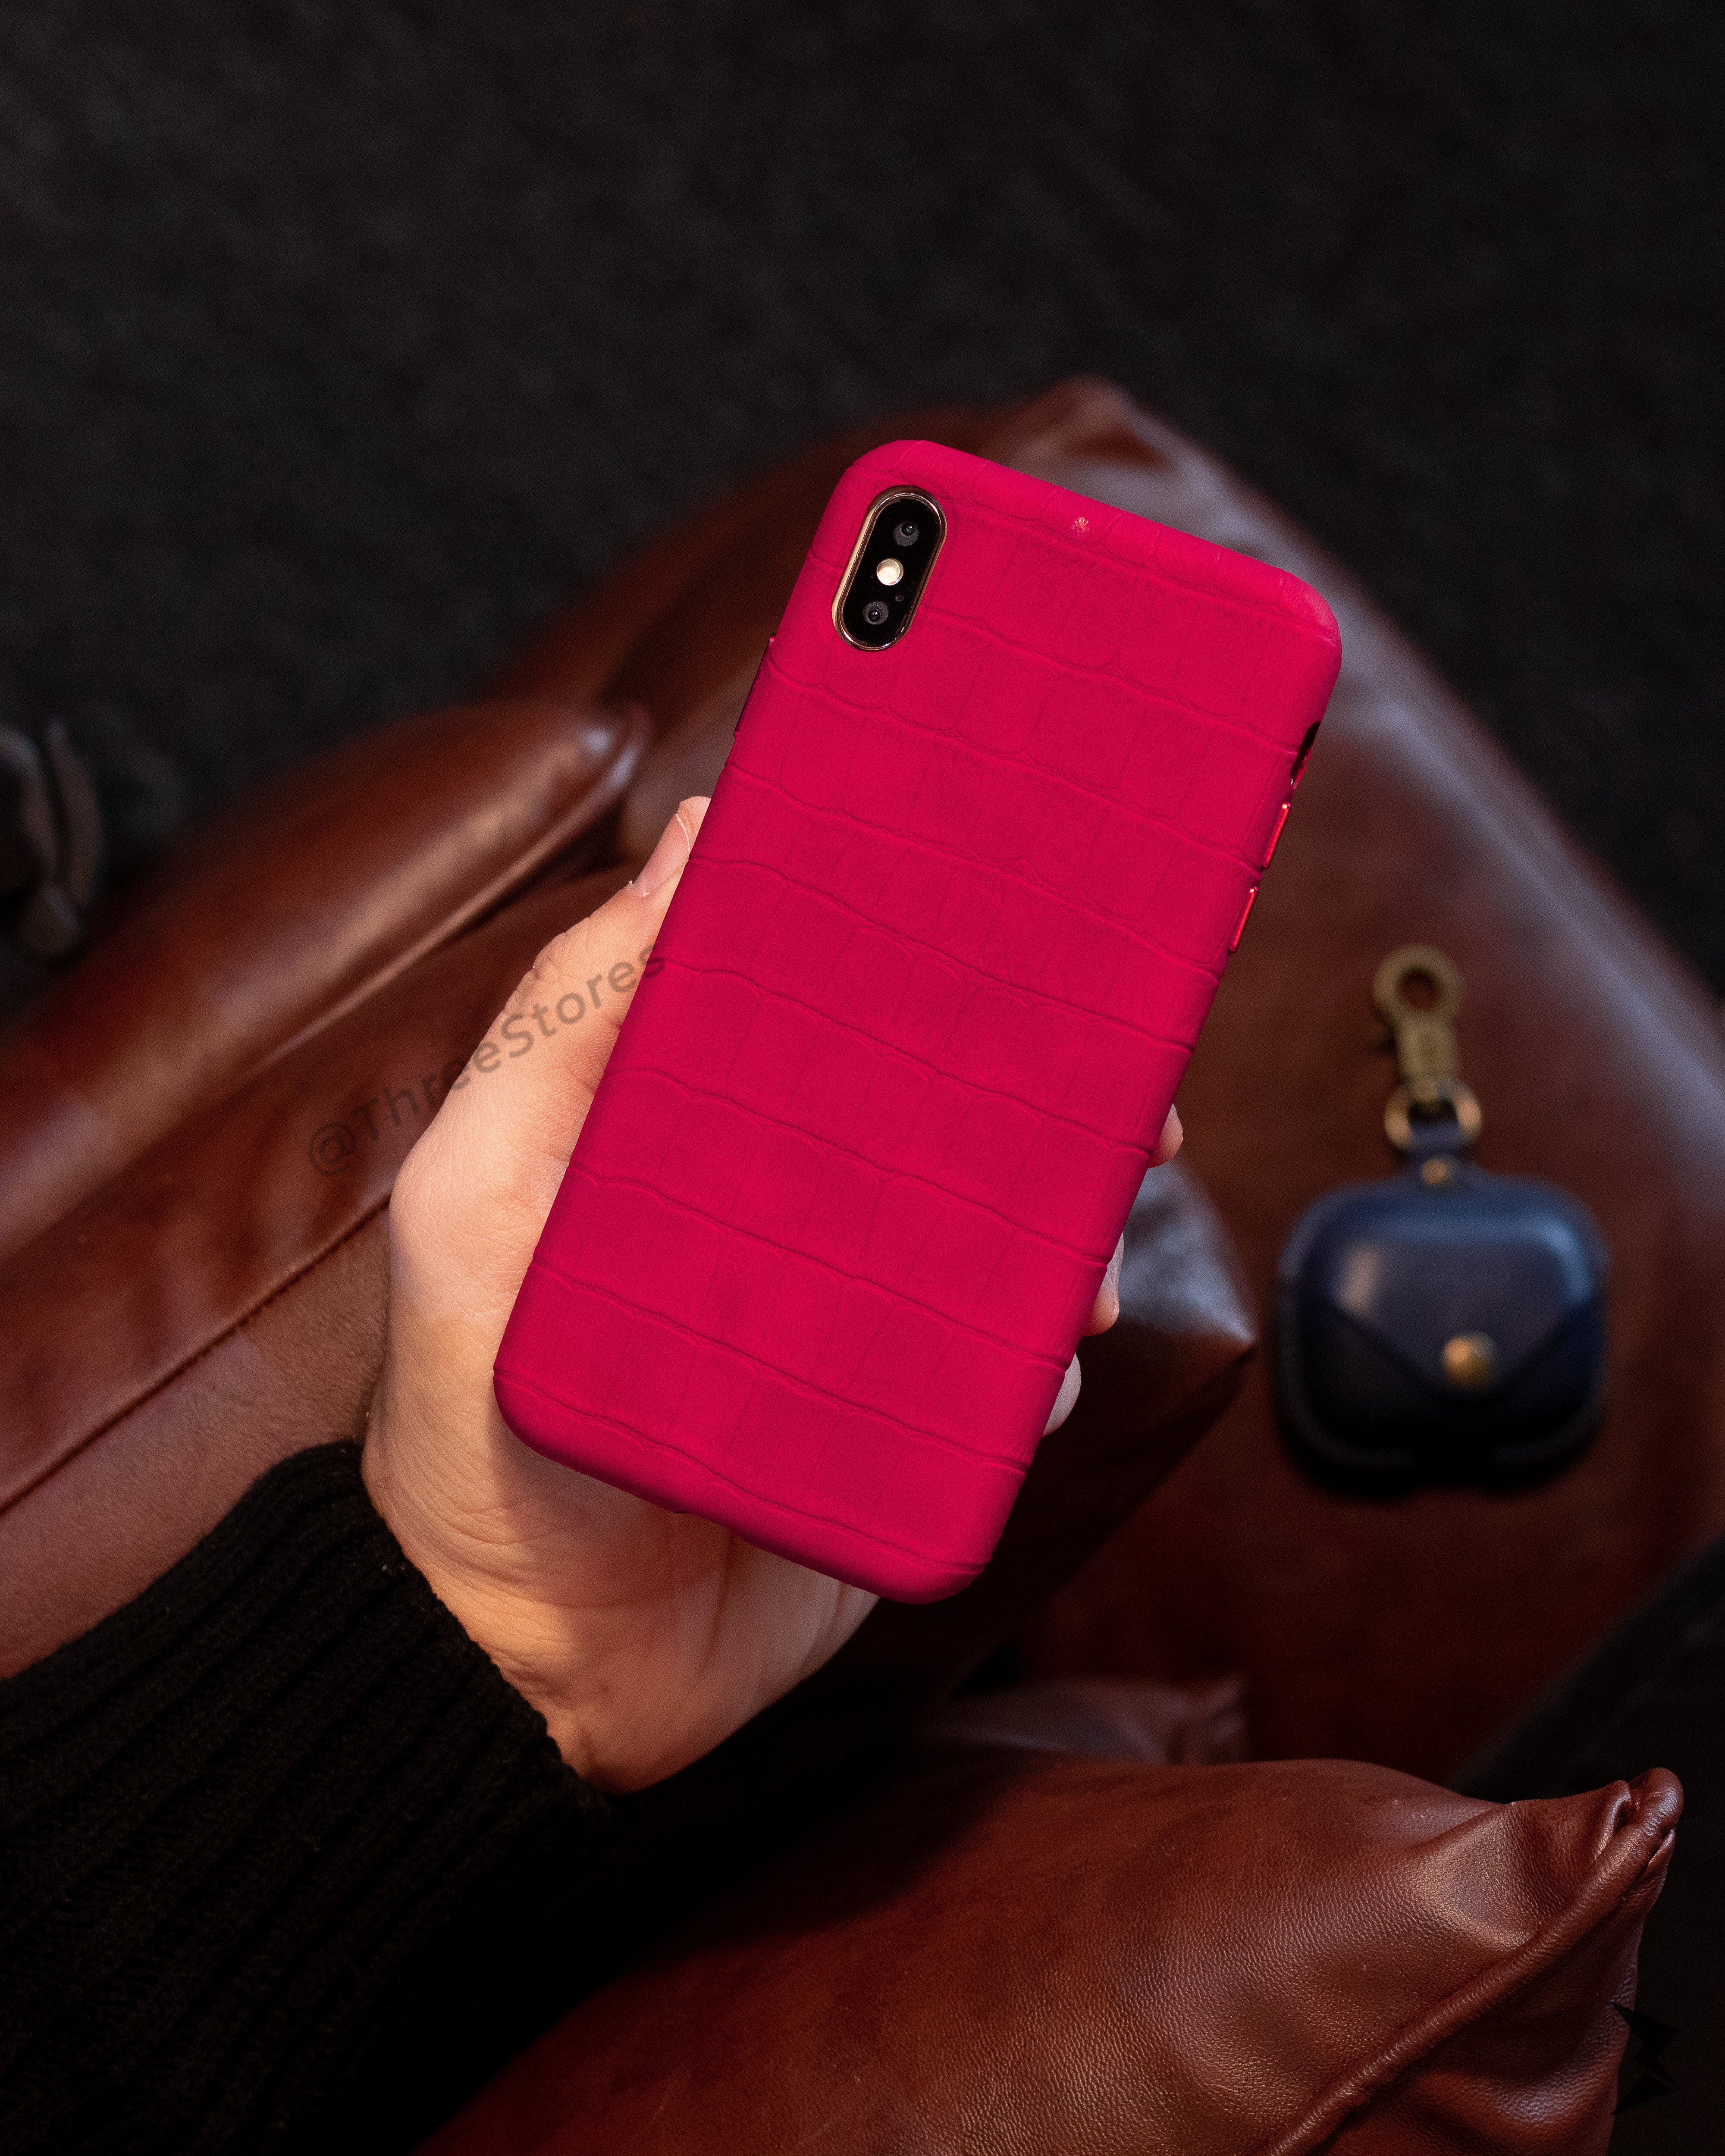 Serpent Leather Case iPhone X Max